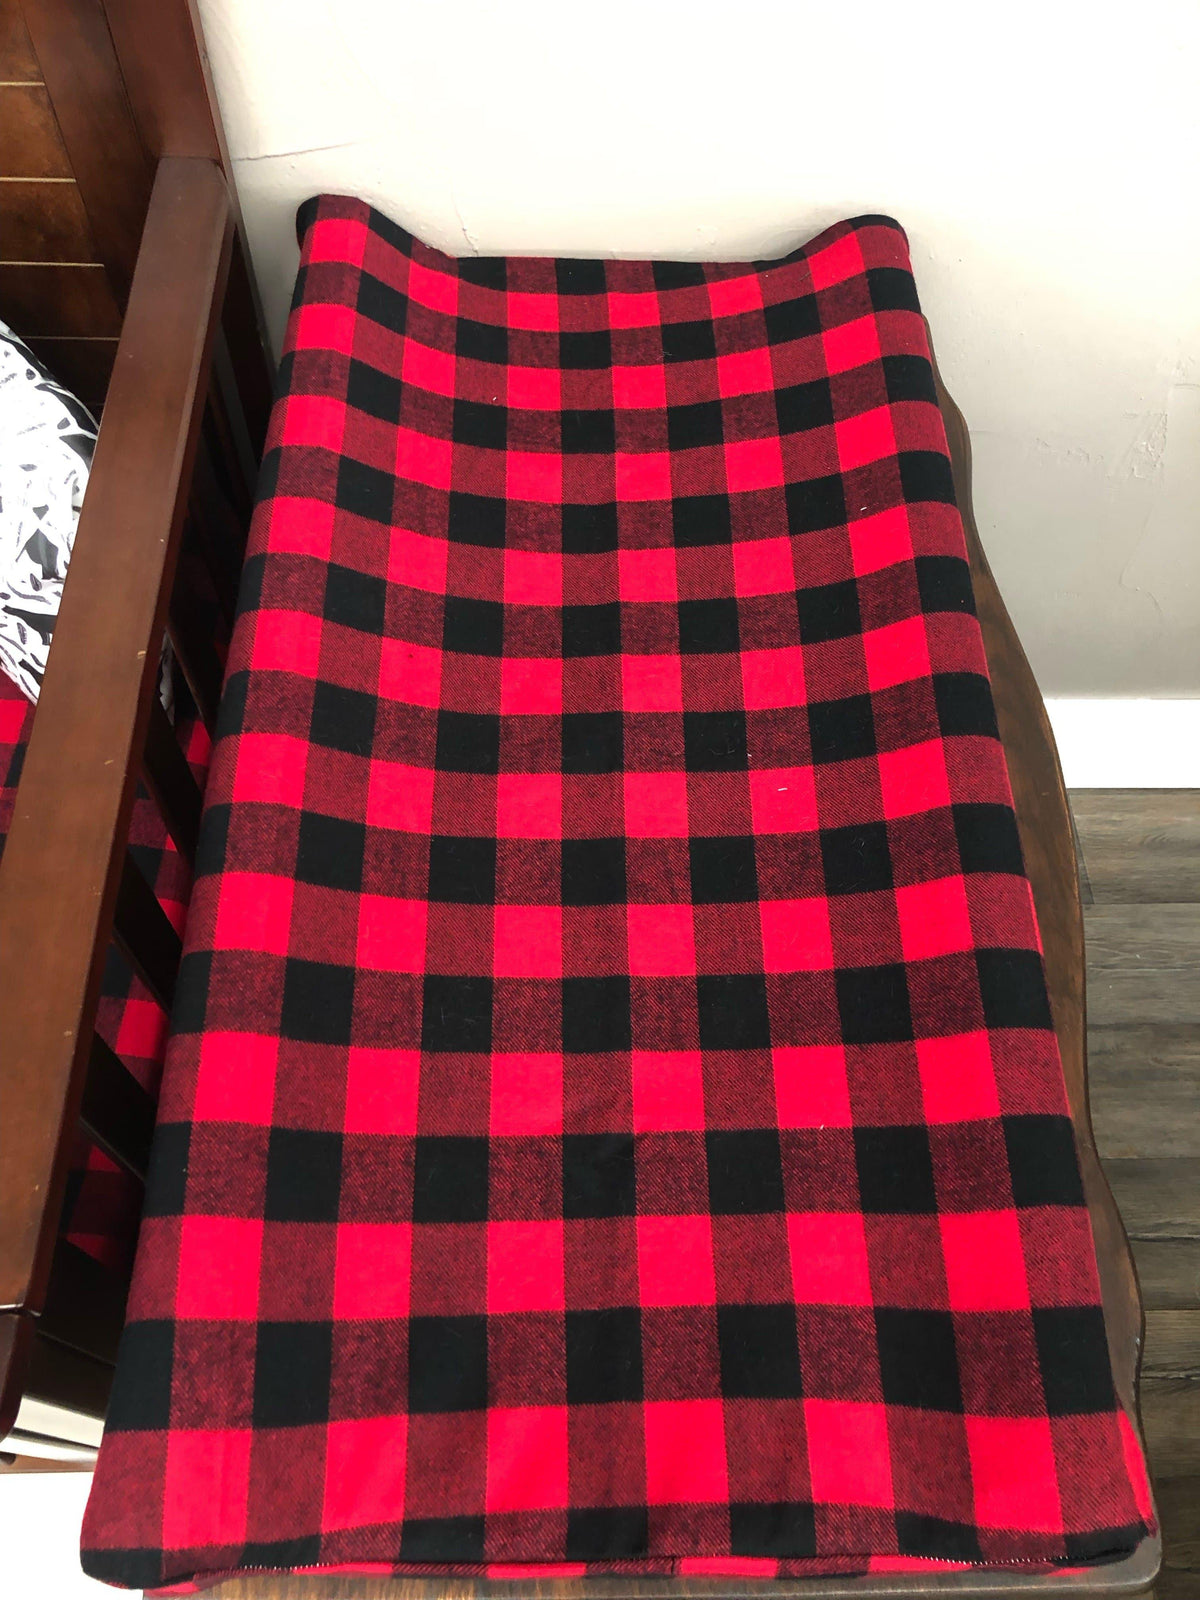 Changing Pad Cover - Check Red Black Buffalo Check - DBC Baby Bedding Co 